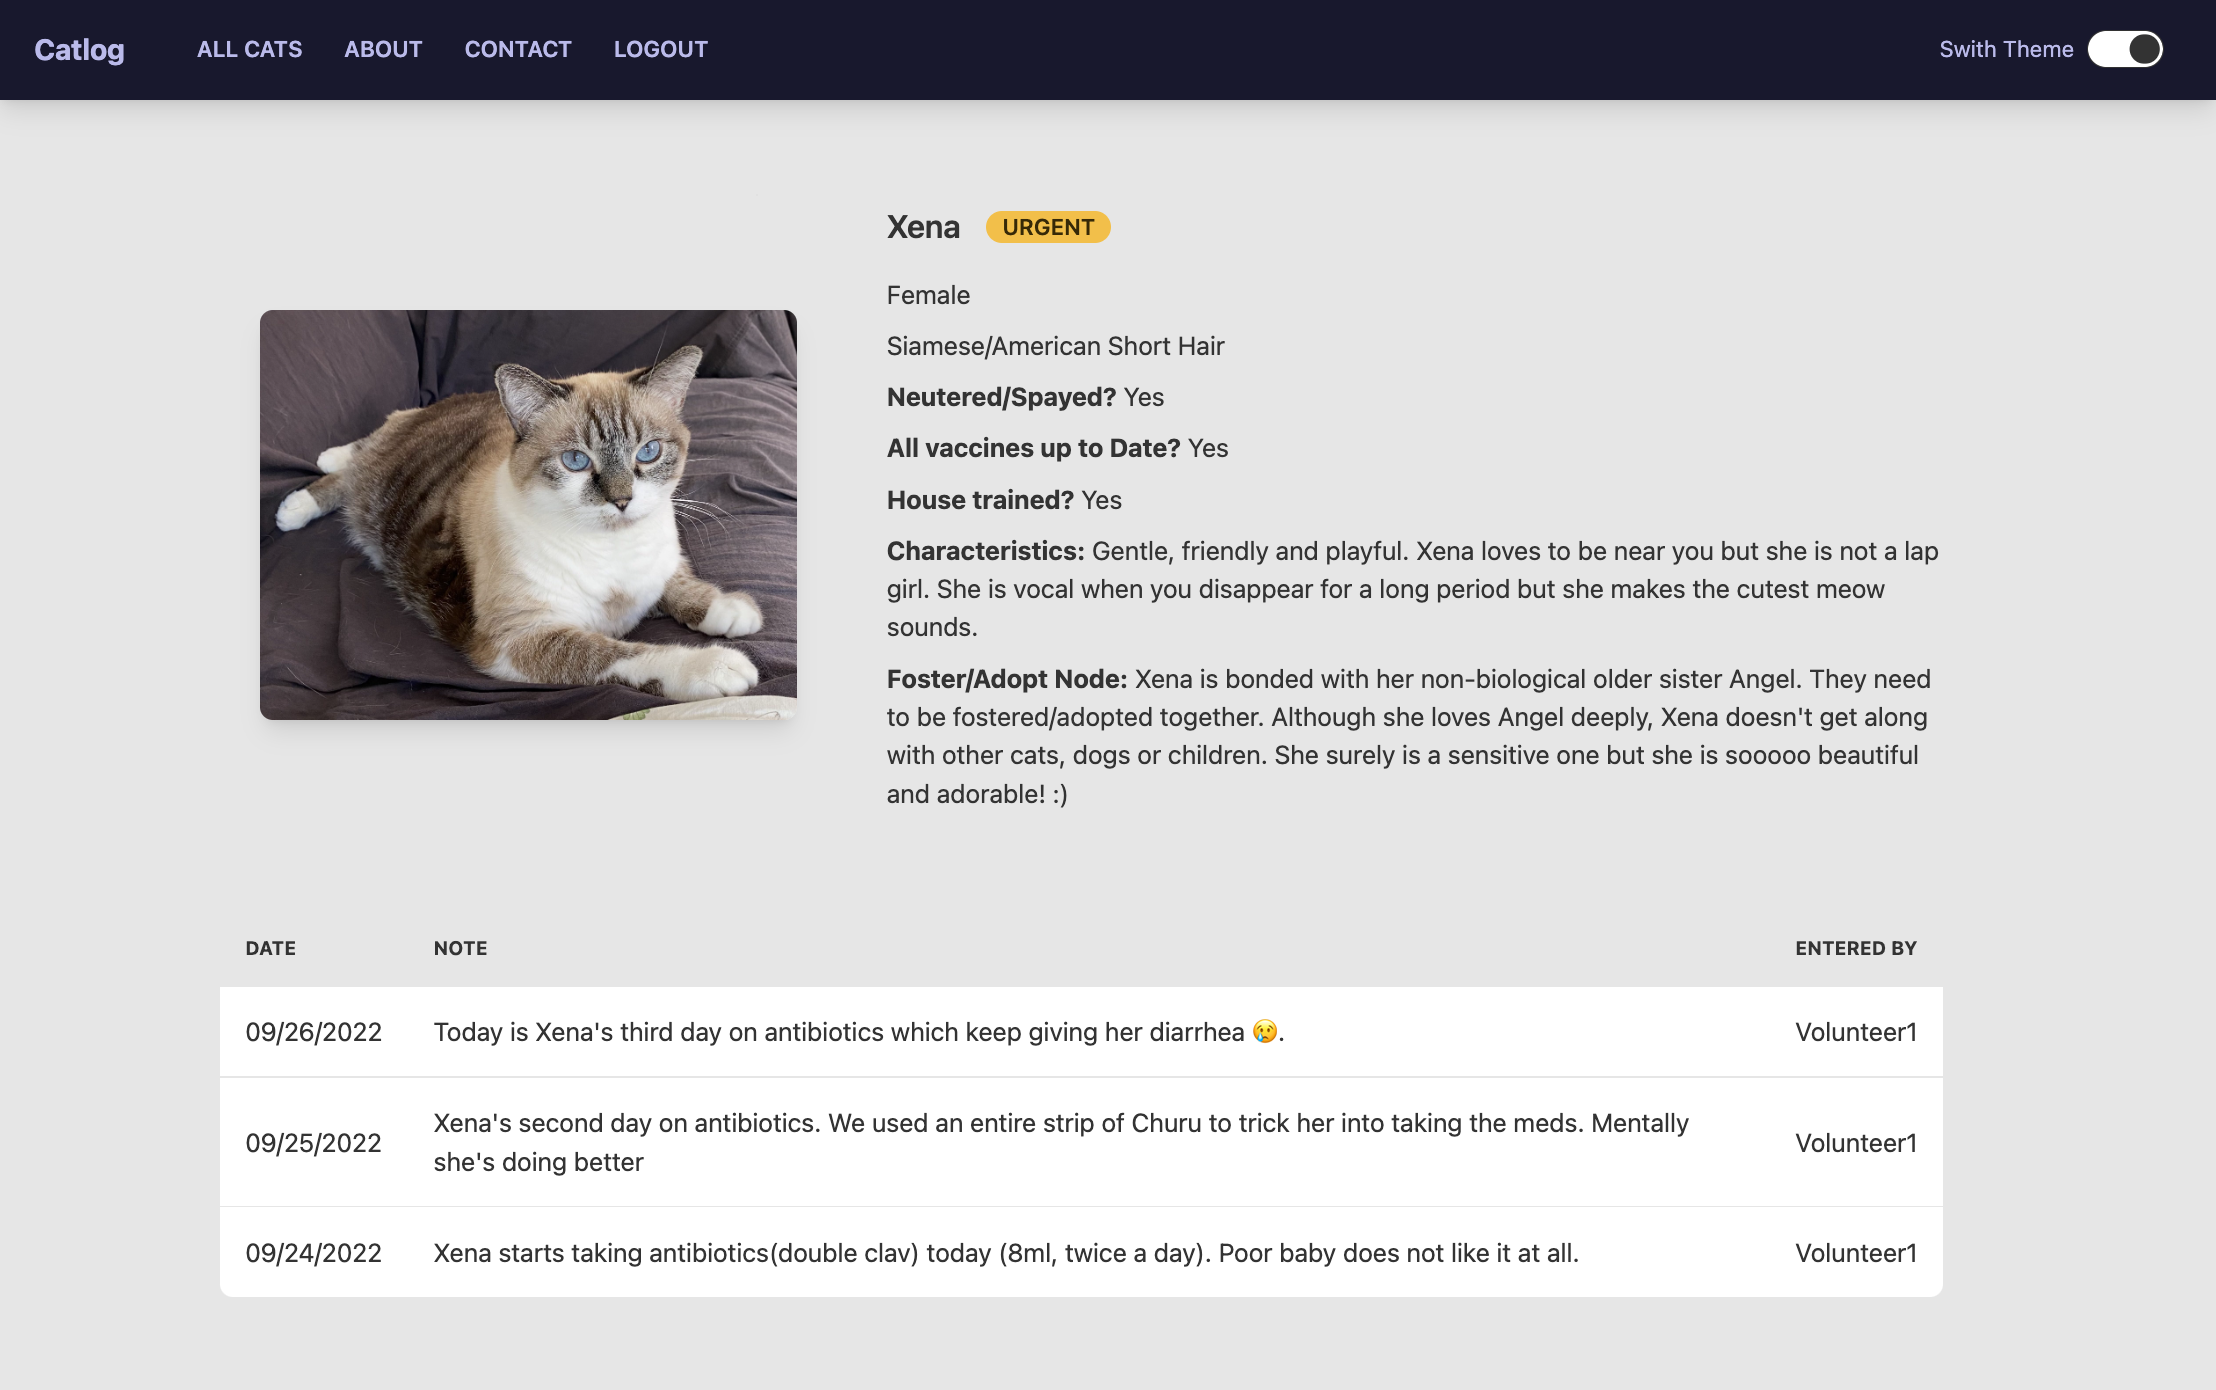 Screen Shot Cat Page Logged in as Volunteer2 (not Xena's foster)